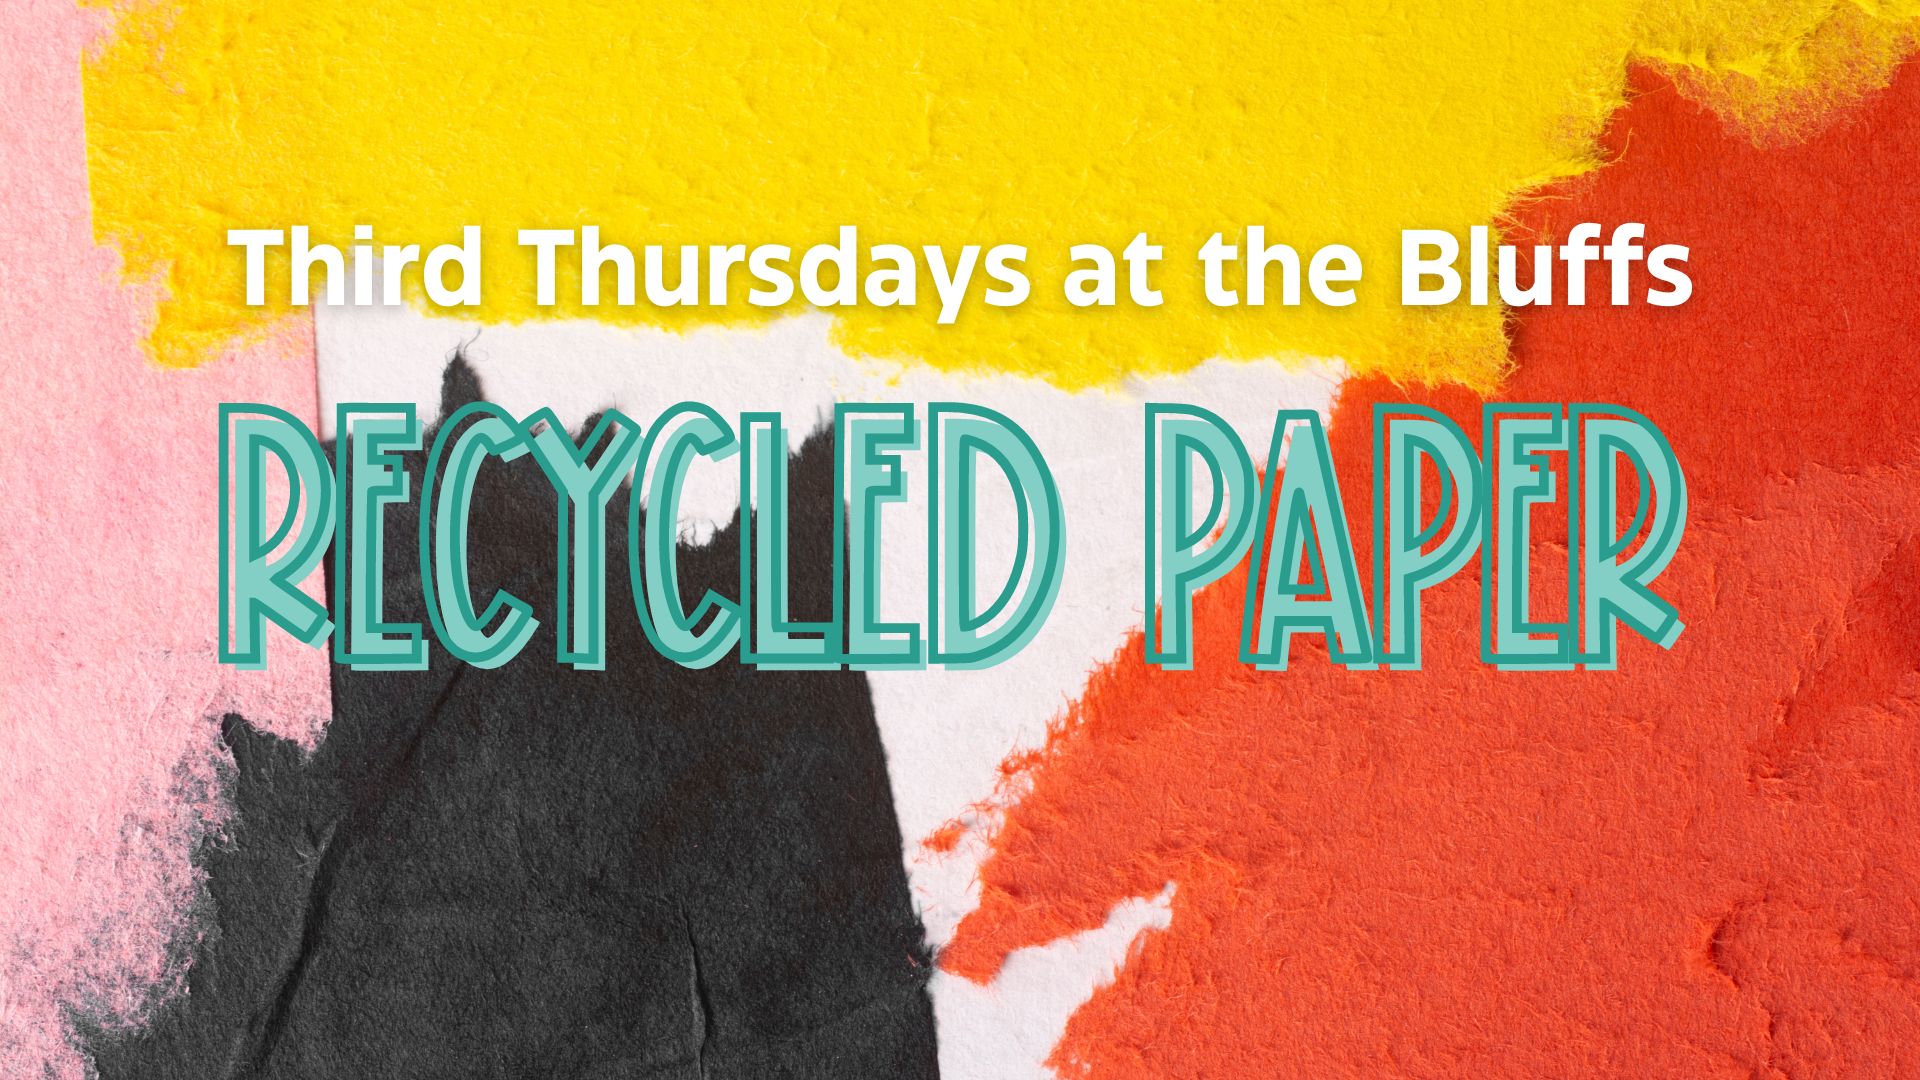 Recycled Paper Third Thursdays at the Bluffs Event